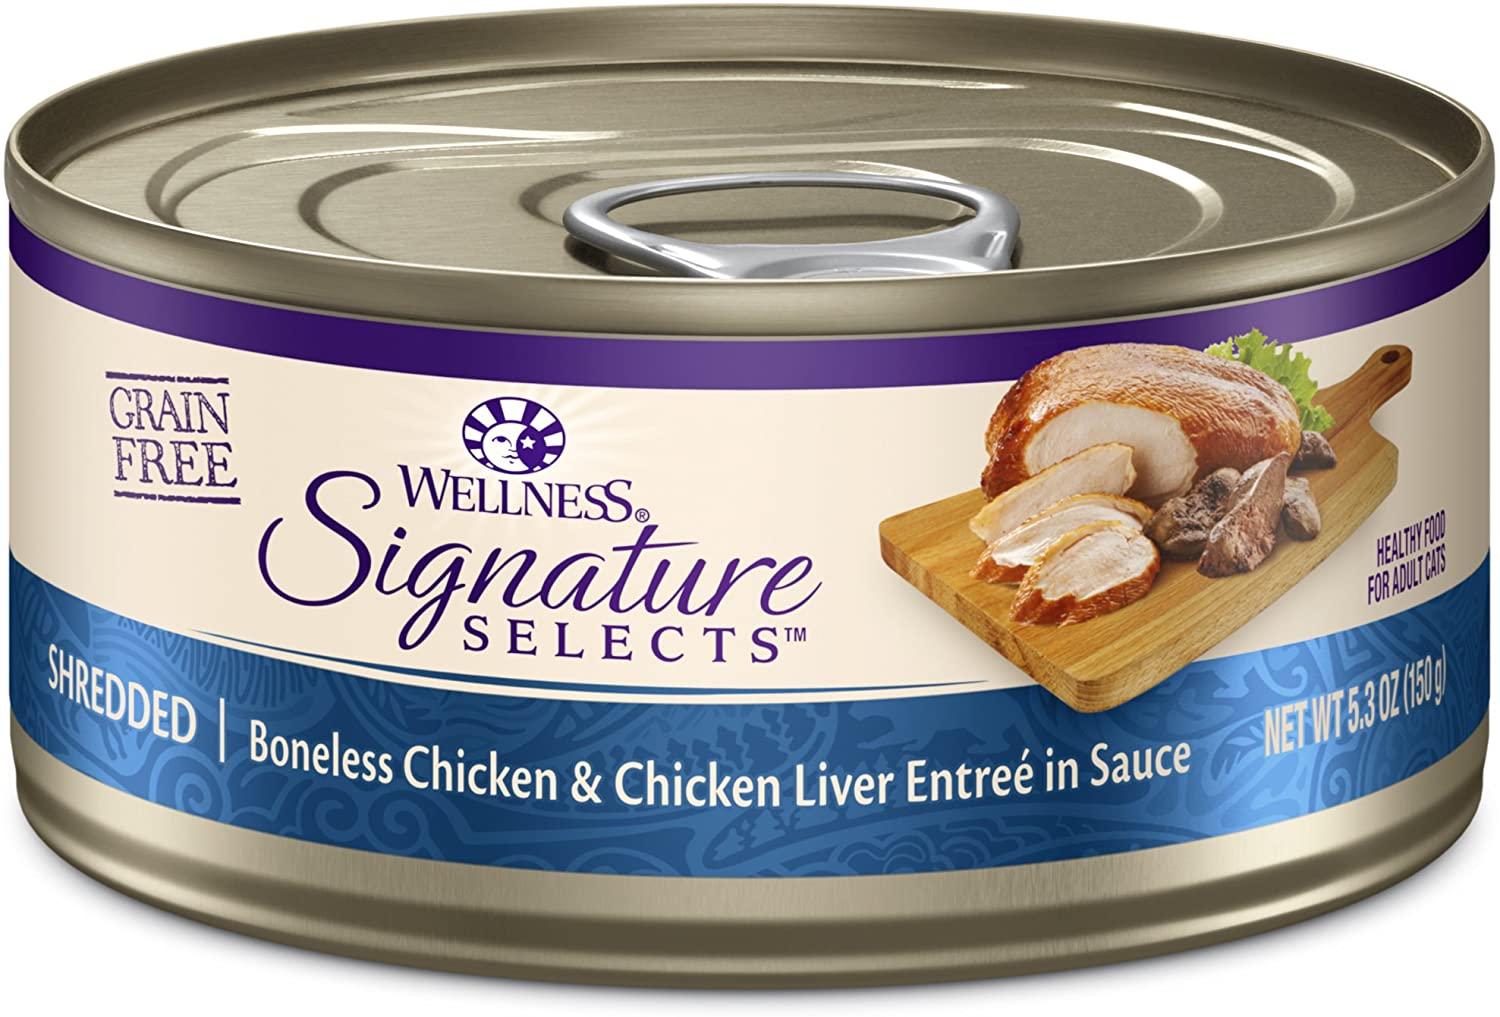 12 Wellness Core Signature Selects Shredded Boneless Wet Cat Food for $11.03 Shipped